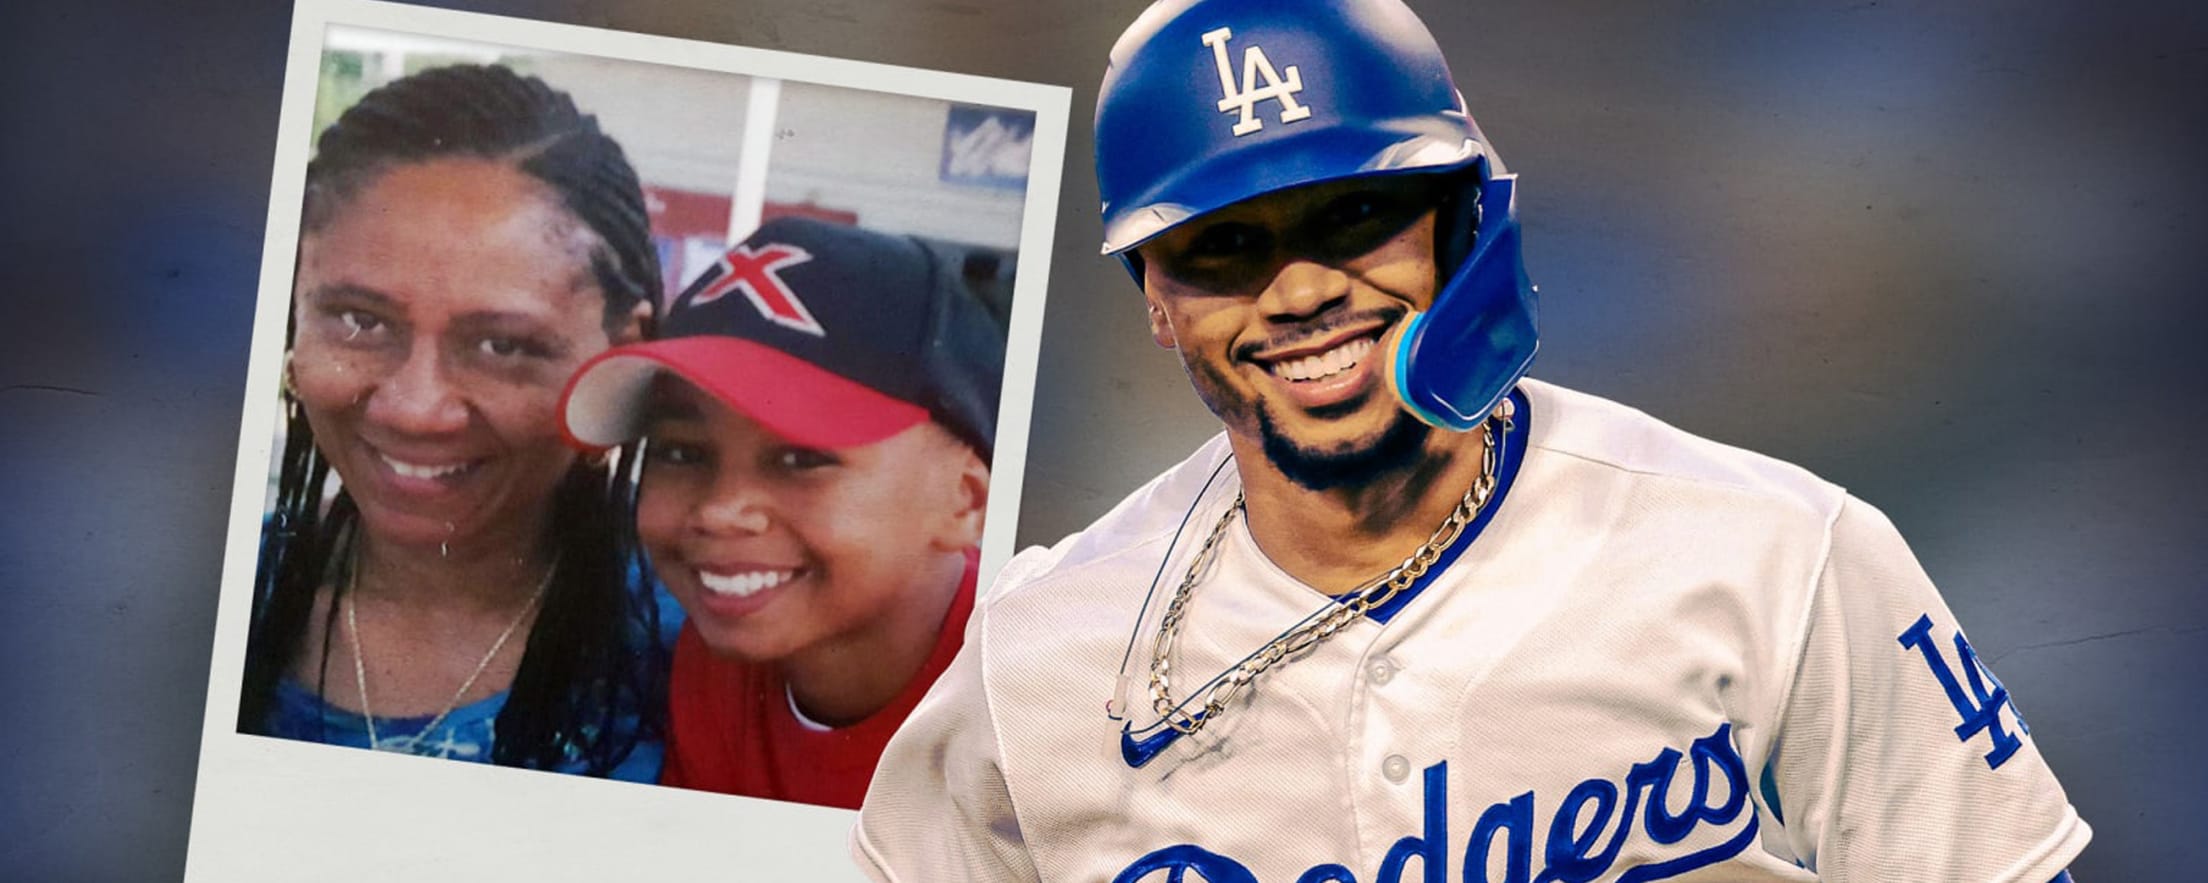 MLB players' Mother's Day memories and messages